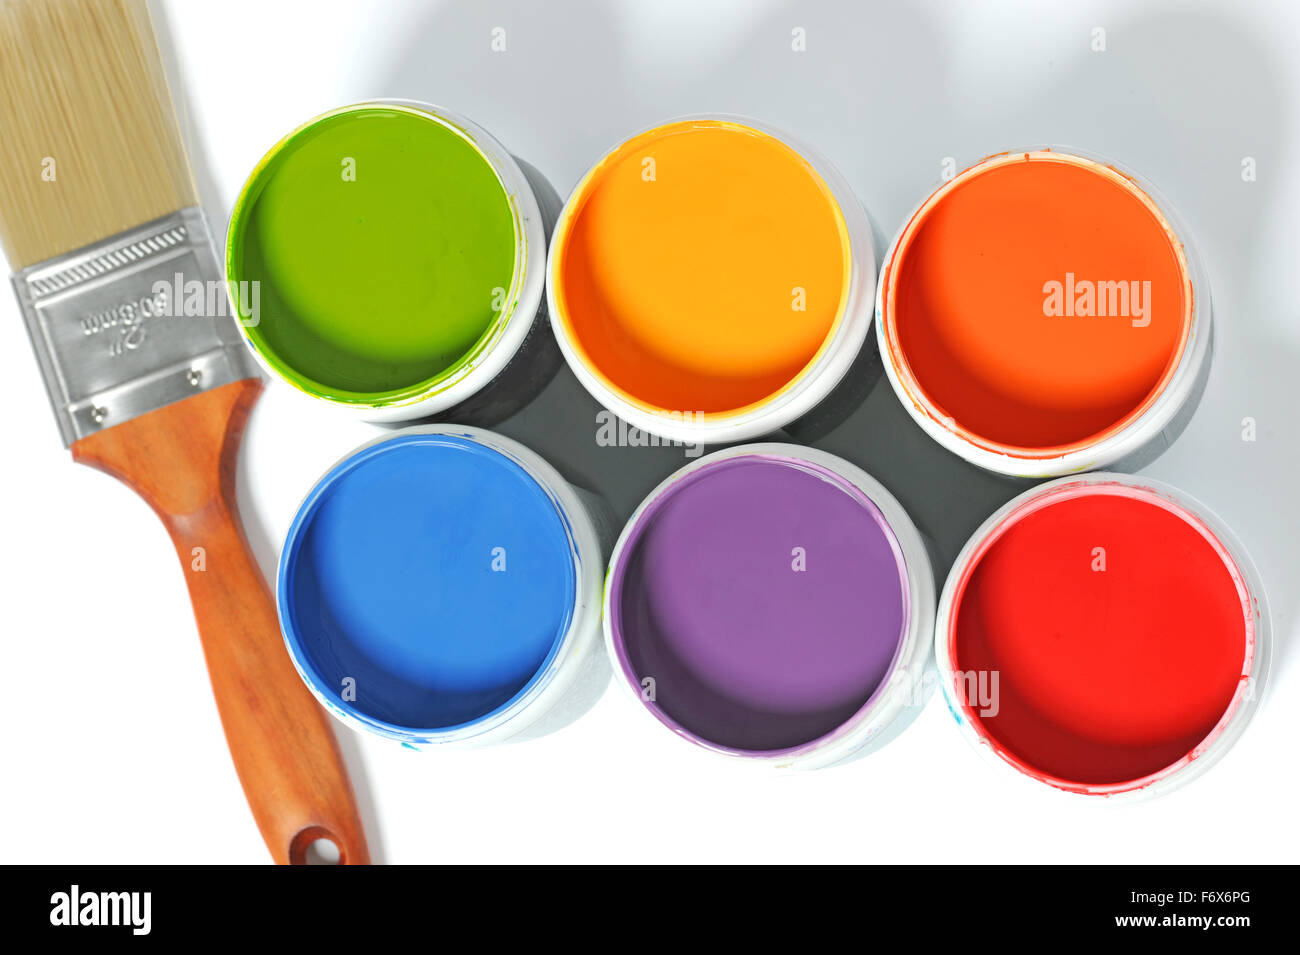 Cans of different colors and paintbrush over light background Stock Photo